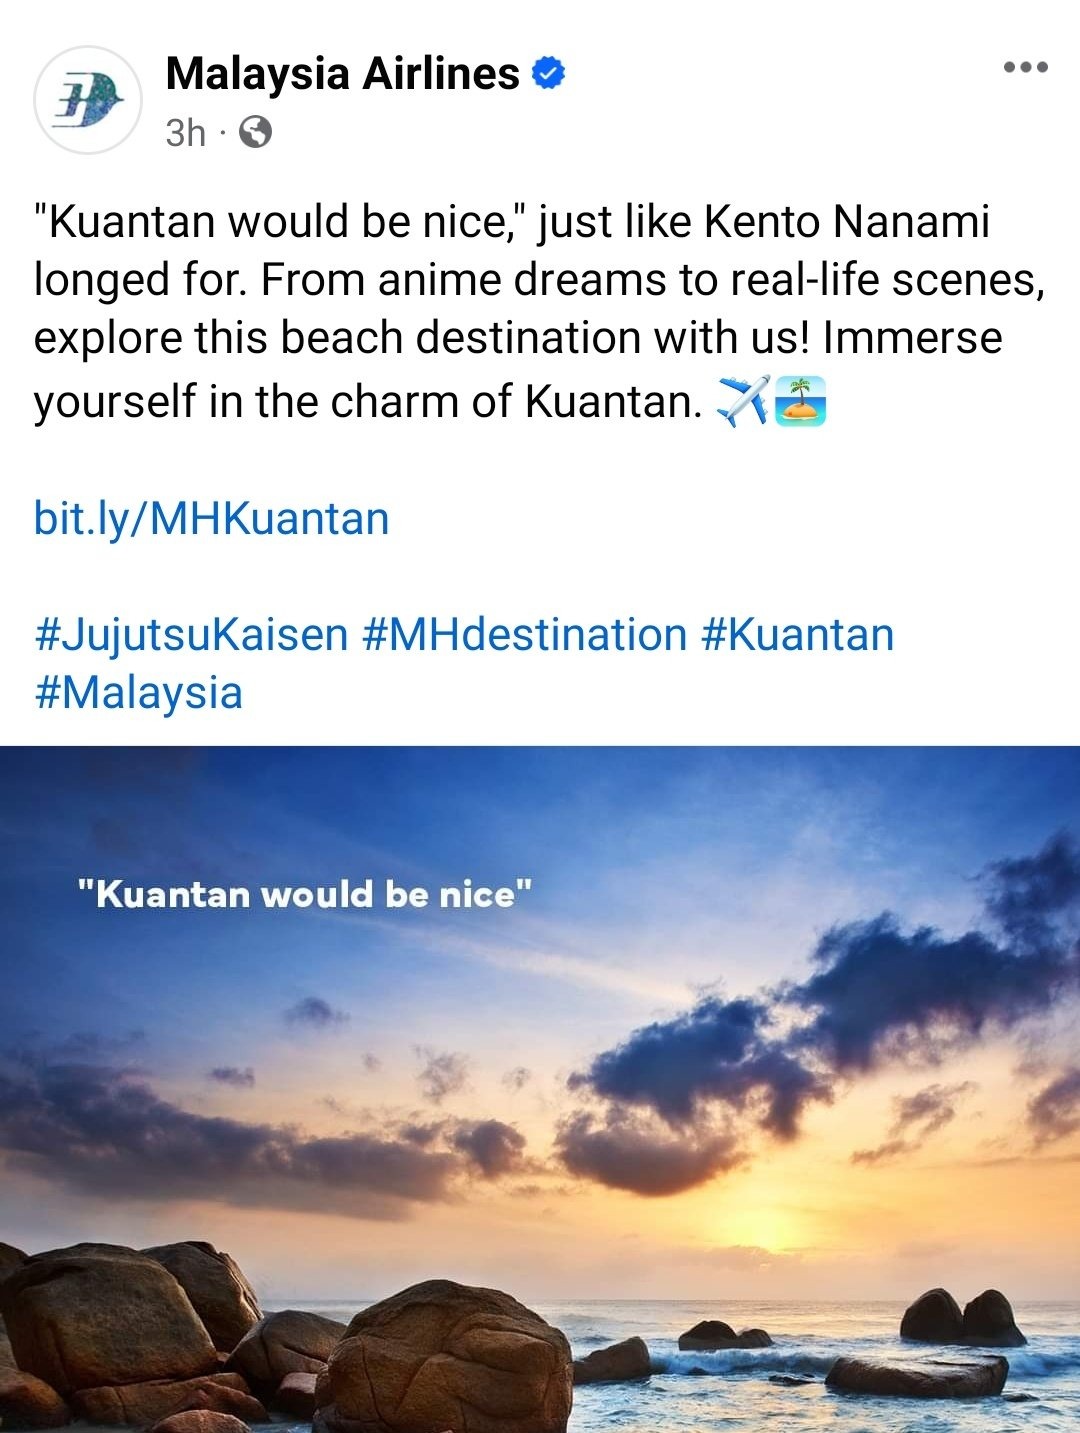 Malaysia Airlines reacts to Nanami’s dream for Jujutsu Kaisen Episode 18